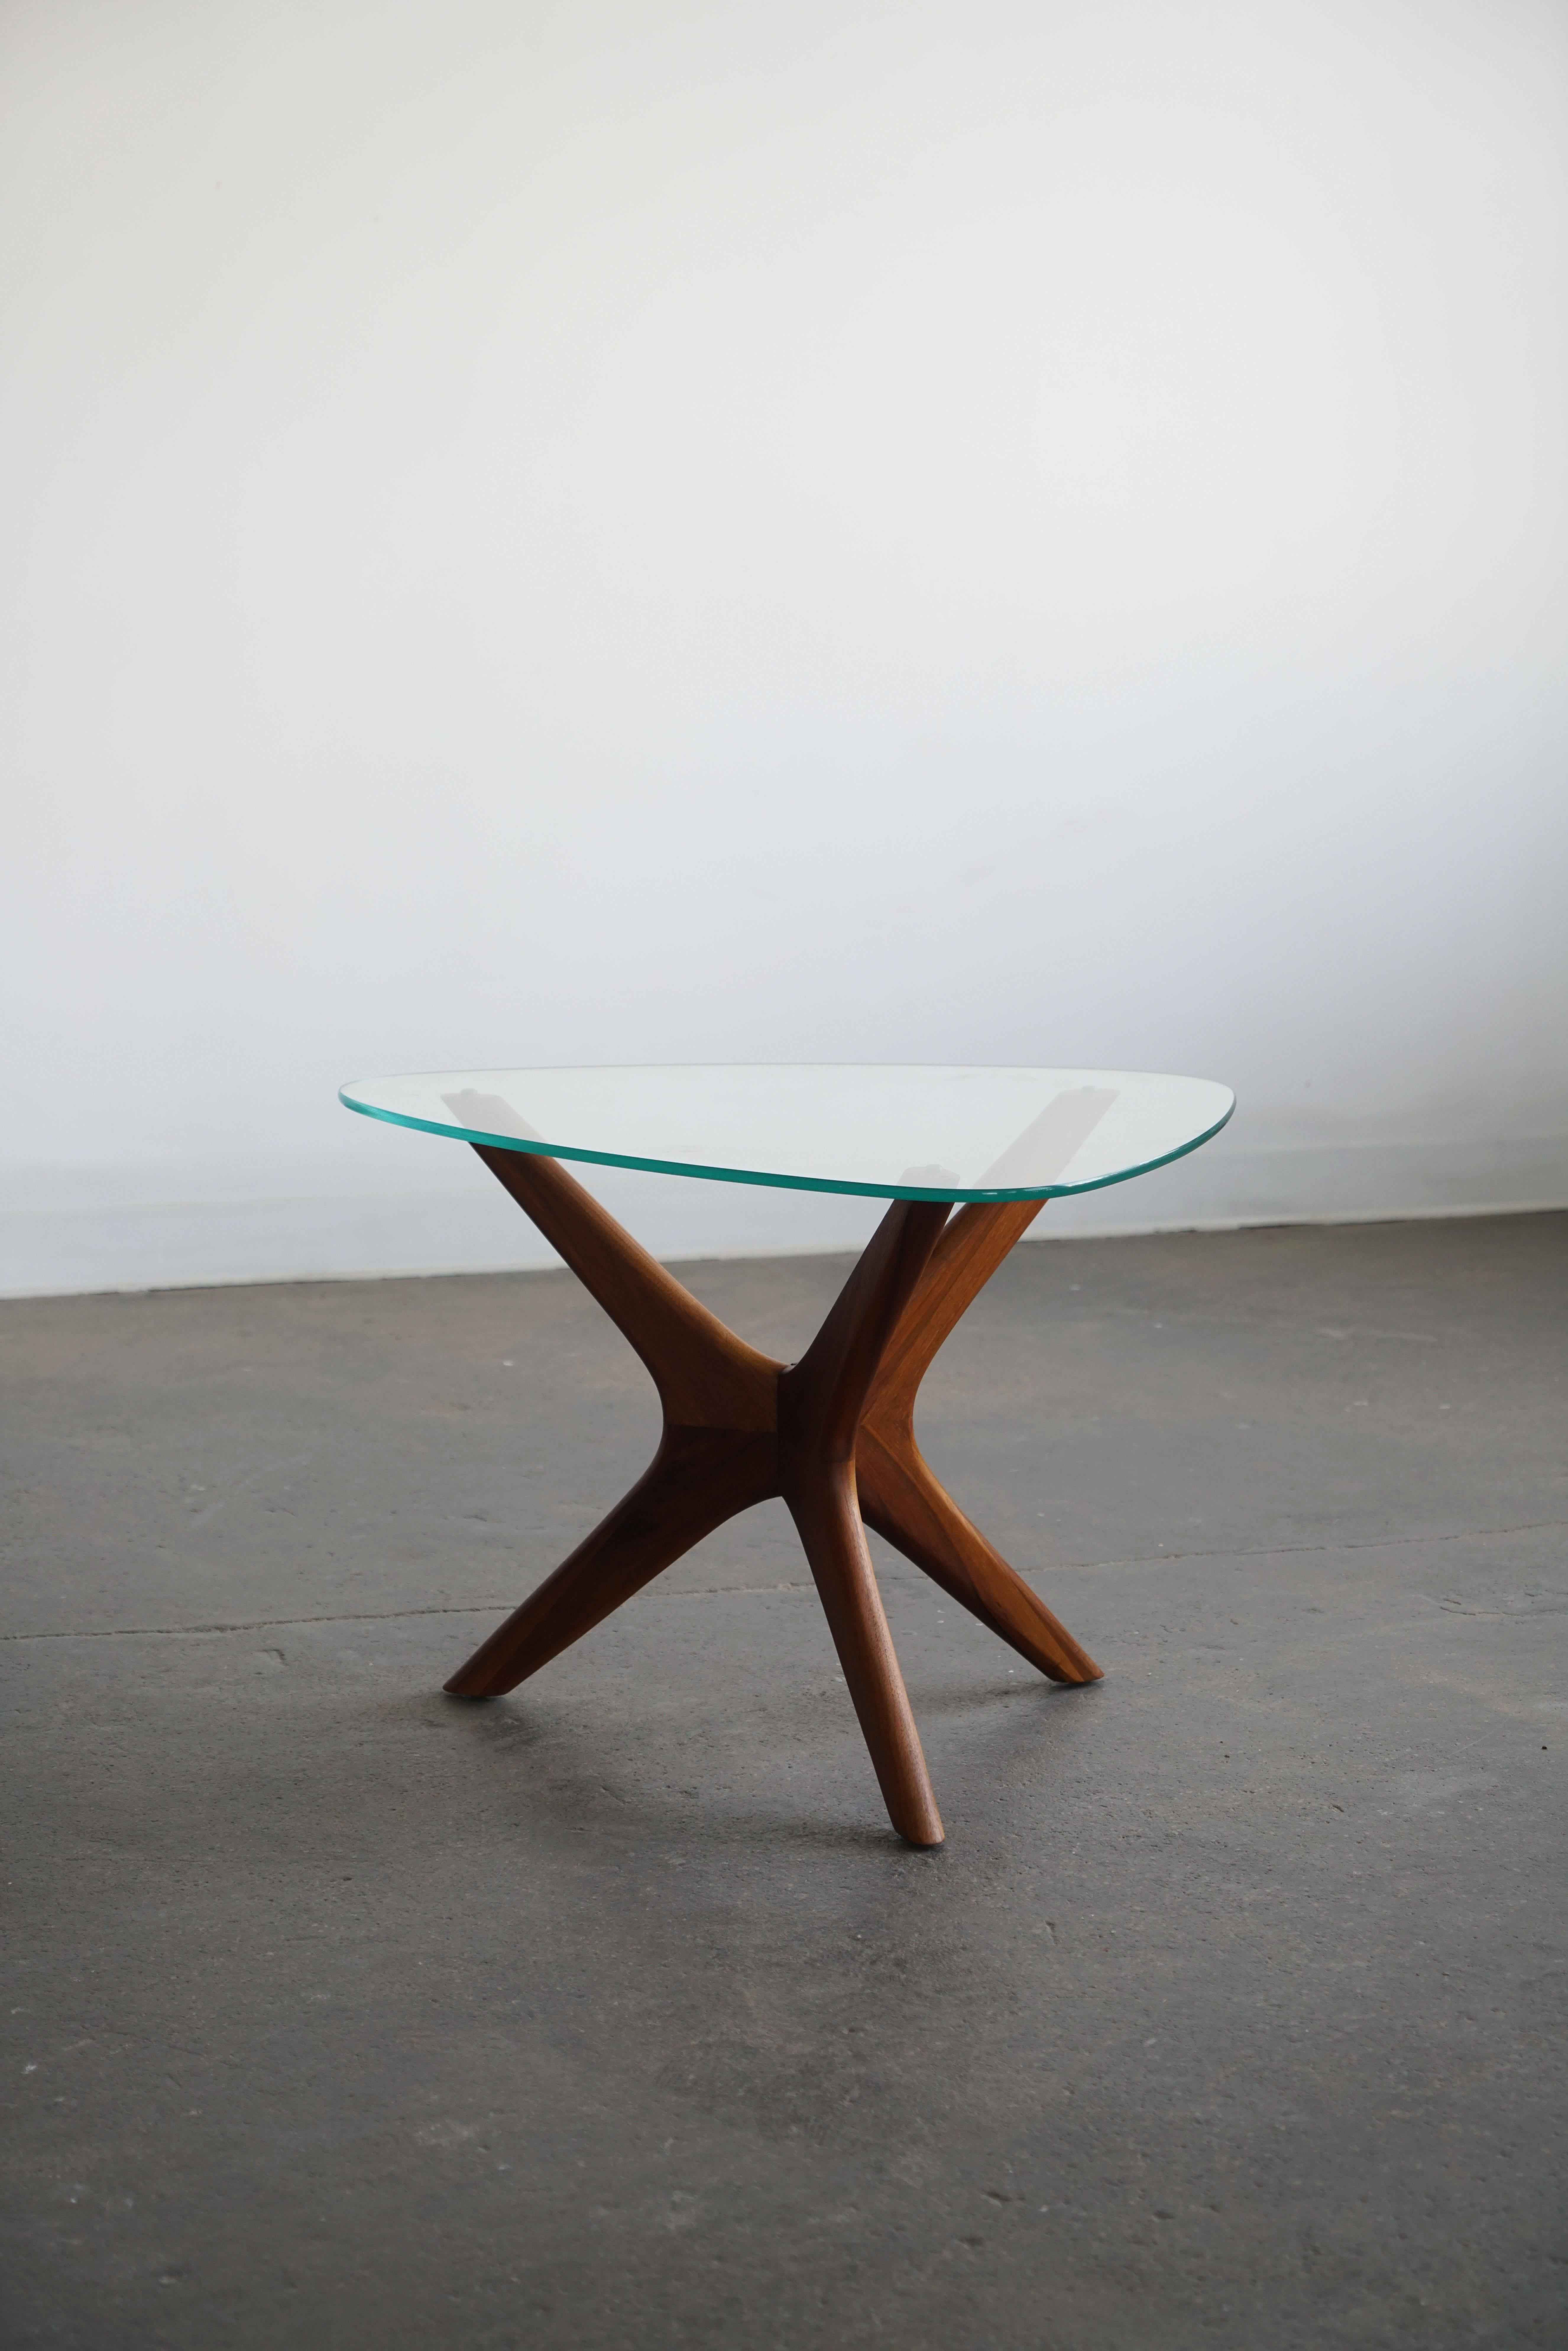 Organic modern side table with sculptural base.
USA, circa. 1965
Walnut, with glass top.
19.25